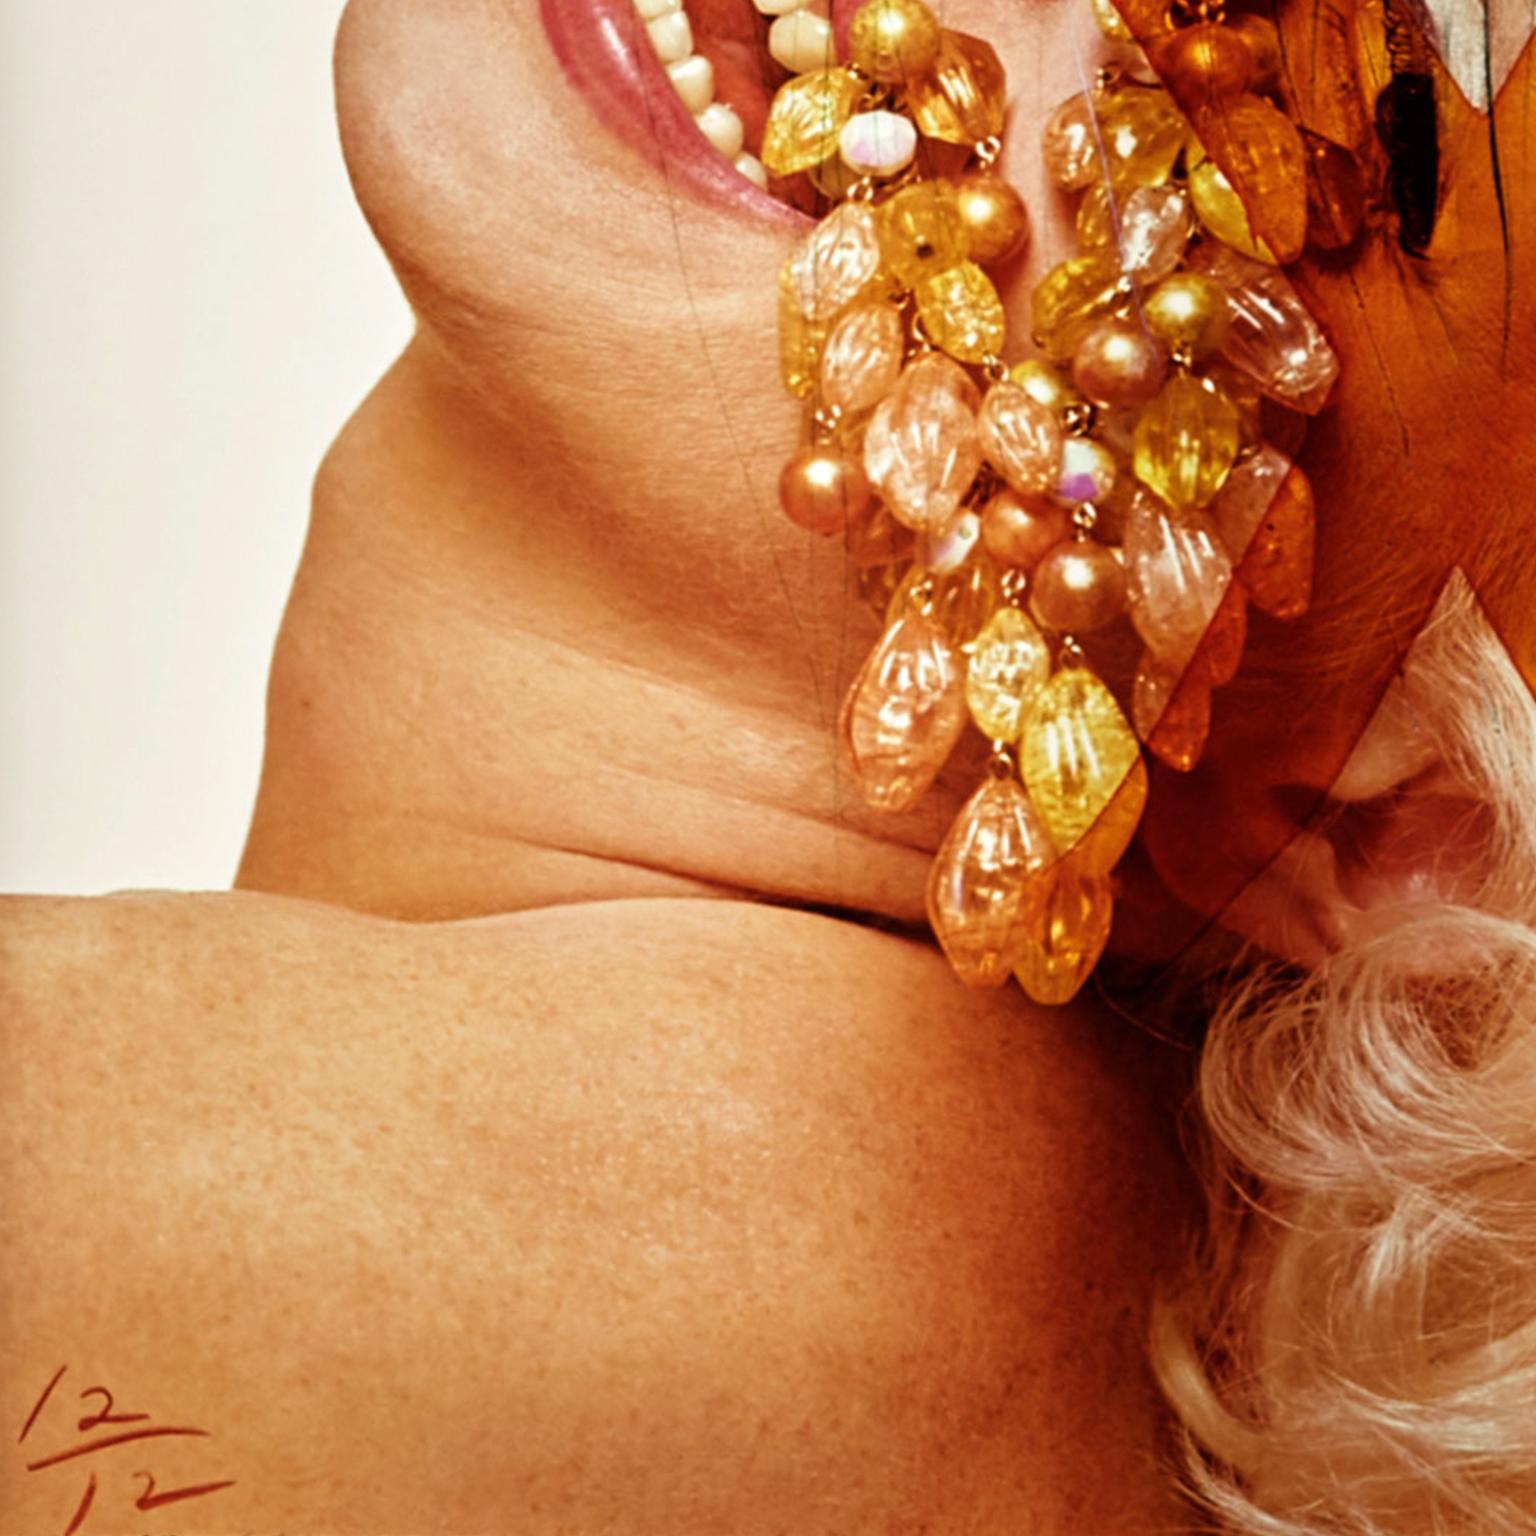 Marilyn Monroe by Bert Stern, C-Print 'Marilyn with Jewels' -Signed & Editioned For Sale 3